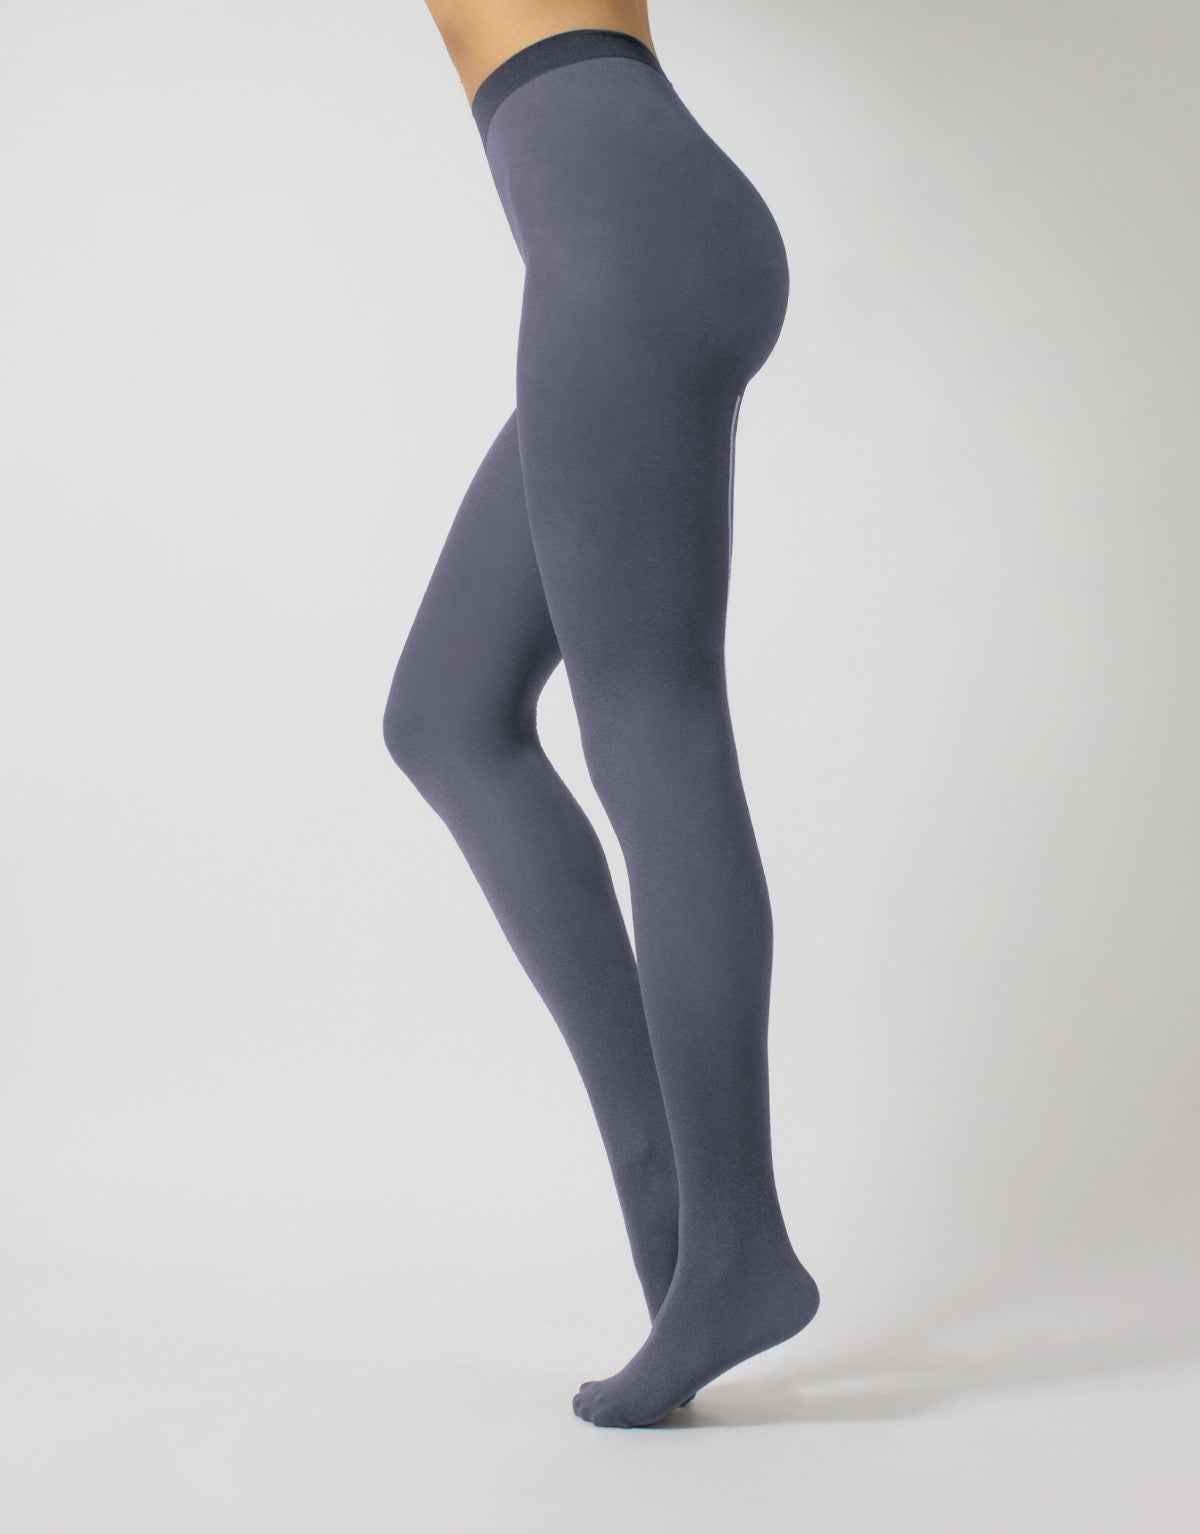 Calzitaly Melange Seam Tights - Denim blue opaque fashion tights with a knitted fleck effect, white back seam.